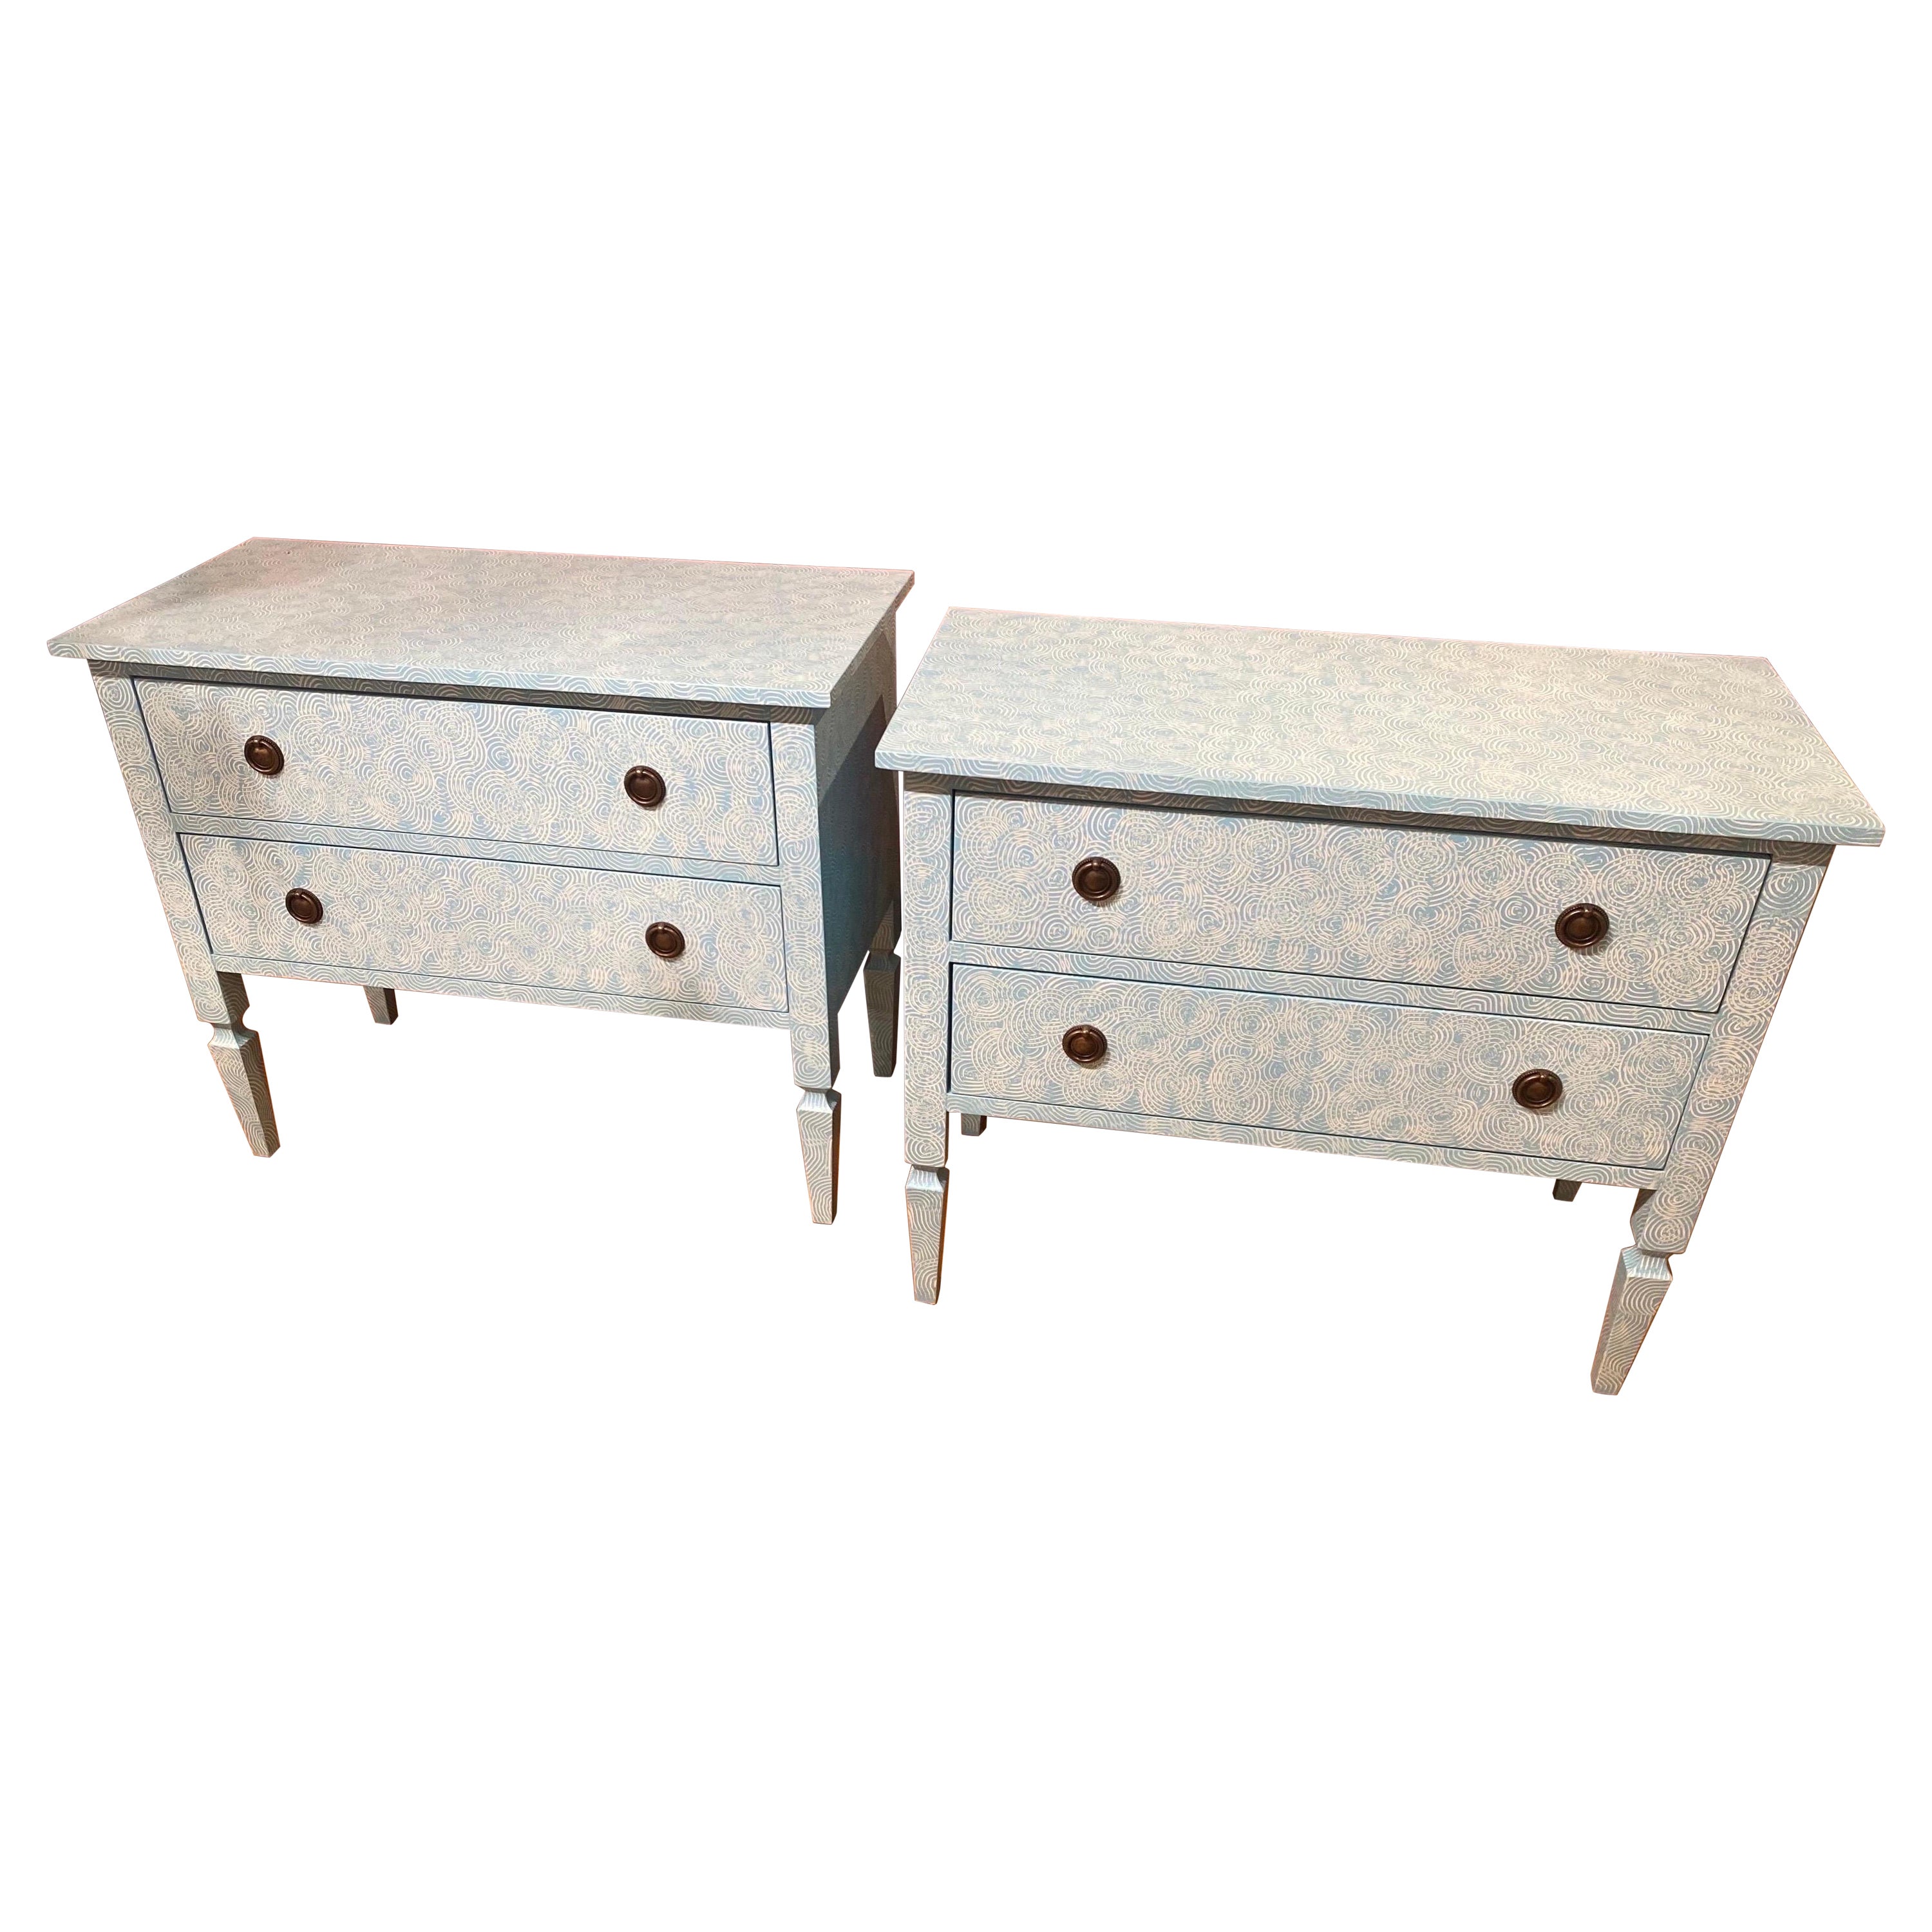 Hand Painted Bedside Chests by “Fabulous Things” in swirl pattern 